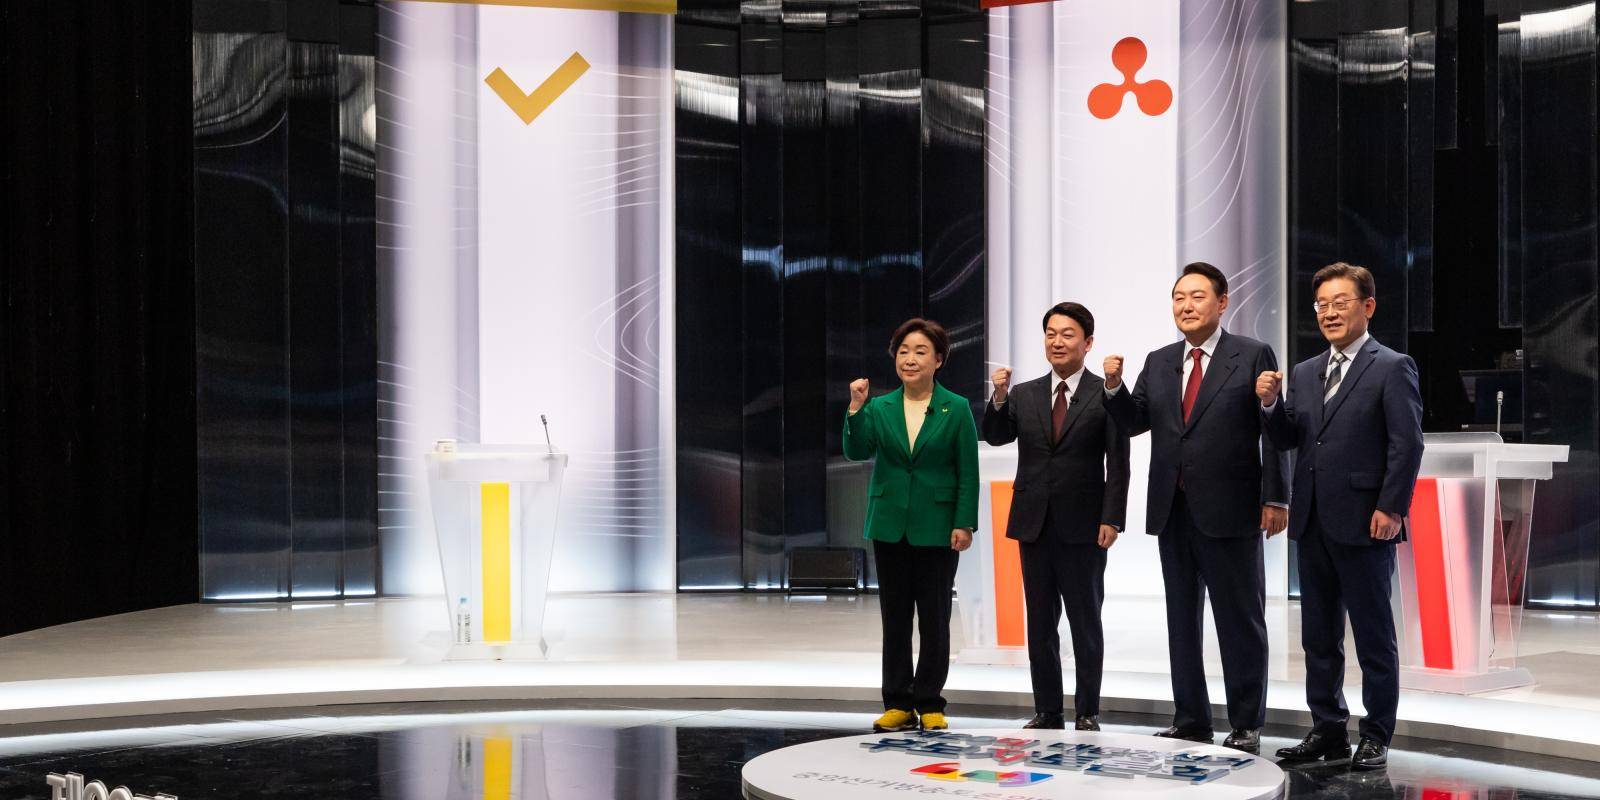 Photo of candidates in South Korean presidential debate, February 2022